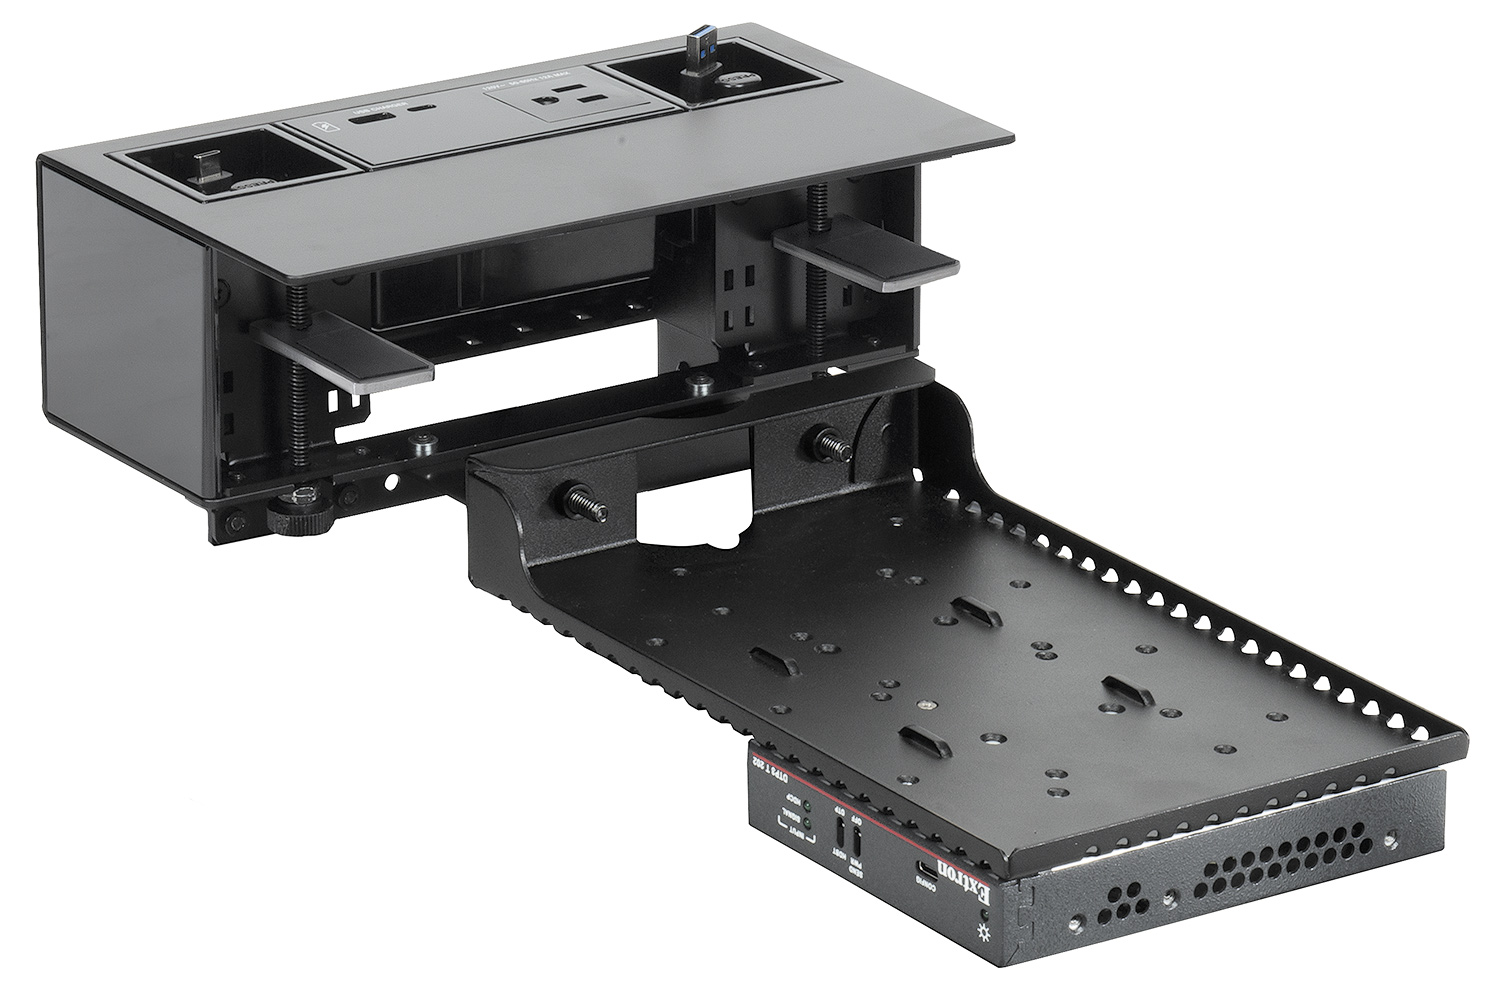 PMK 155 shown with optional Cable Cubby F55 Edge enclosure, modules, and device